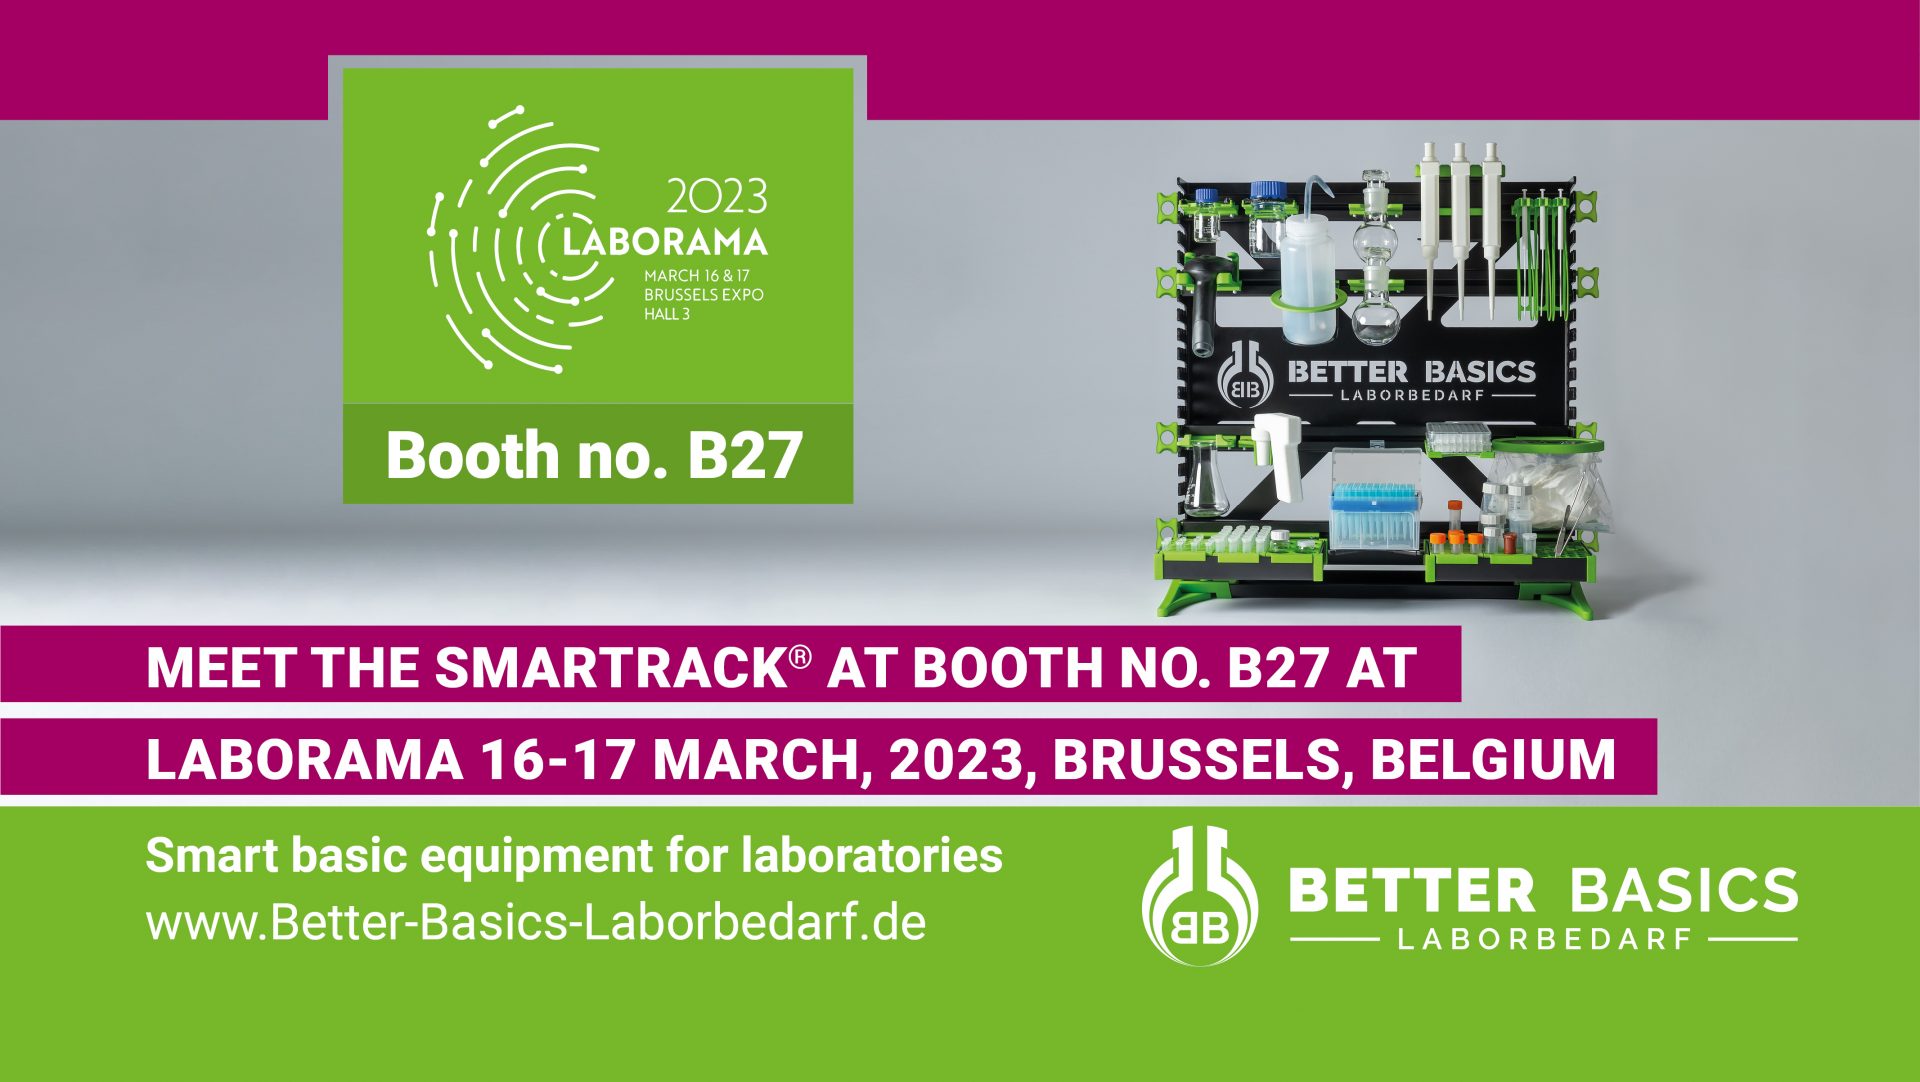 Visit the SmartRack® at booth B27 at Laborama, March 16-17, 2023, Brussels Expo, Hall 3, Brussels, Belgium.